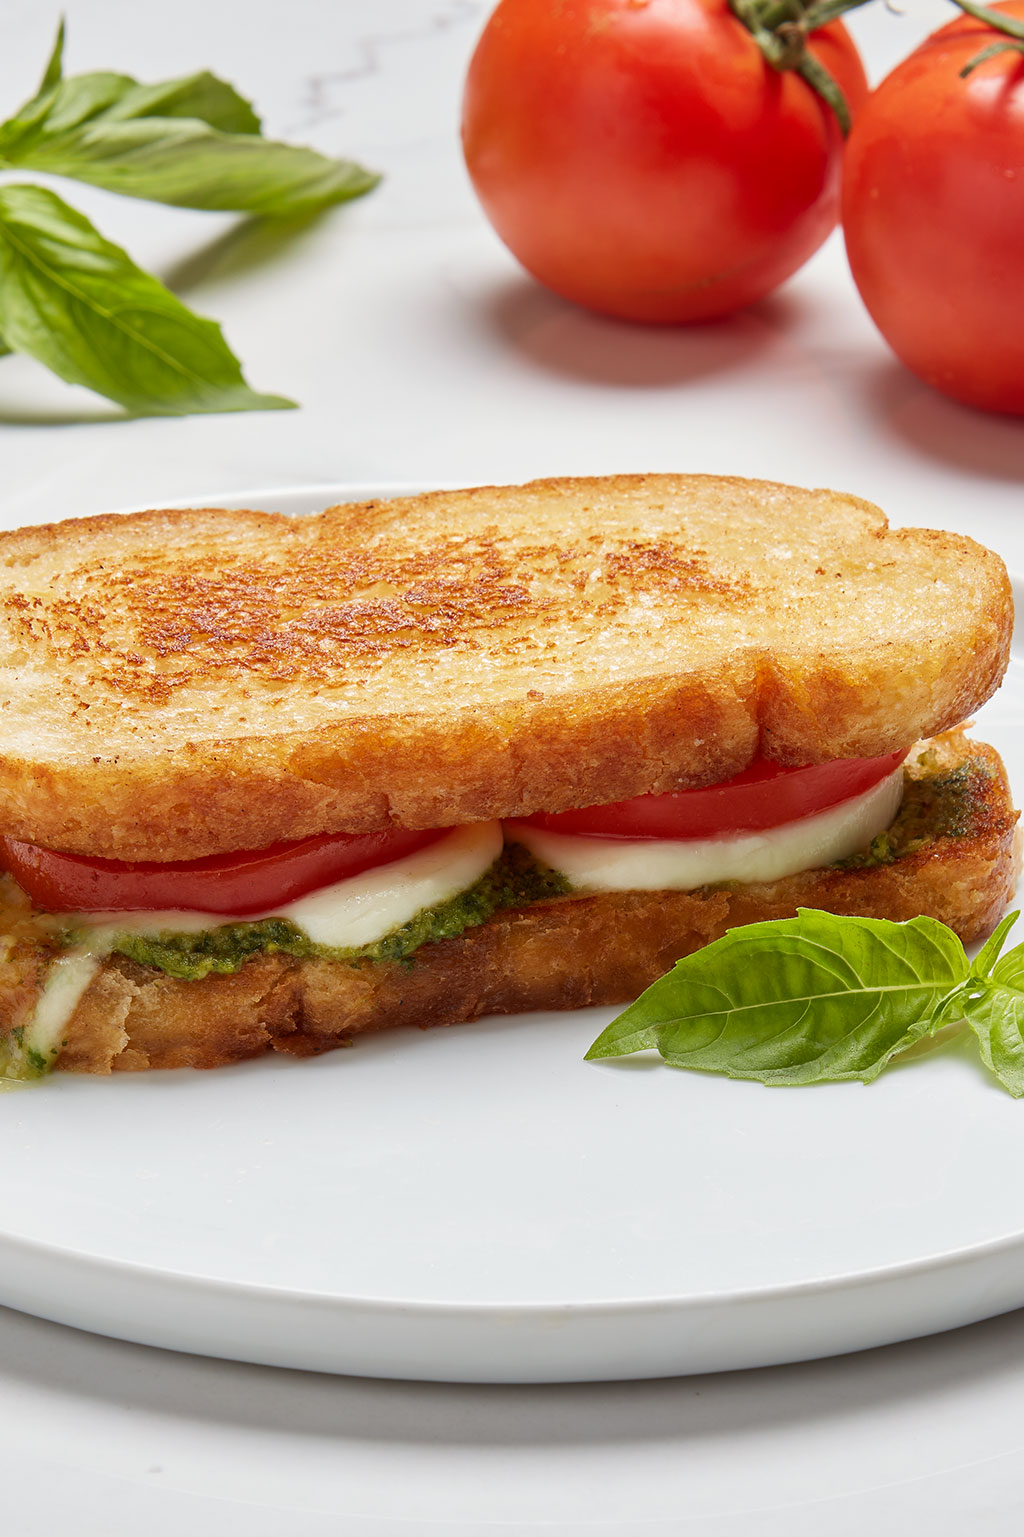 Grilled Pesto and Mozzarella Sandwich from Simple Food 4 You by Alexandra Johnsson.